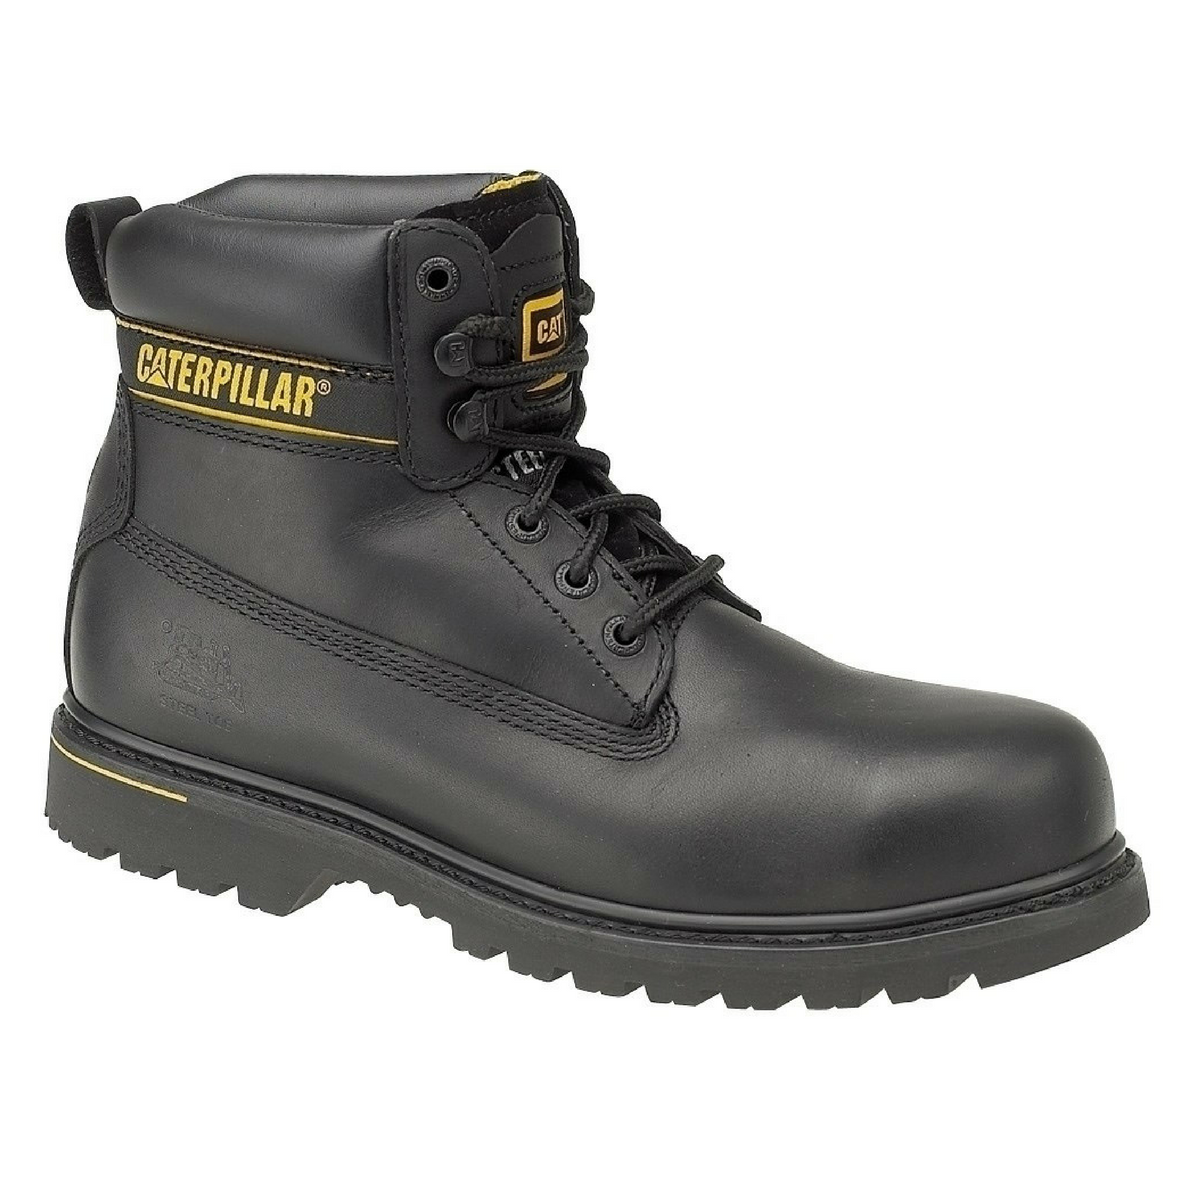 CAT Caterpillar HOLTON Mens Leather Safety Work Boots Shoes Steel Toe Cap SB SRA 